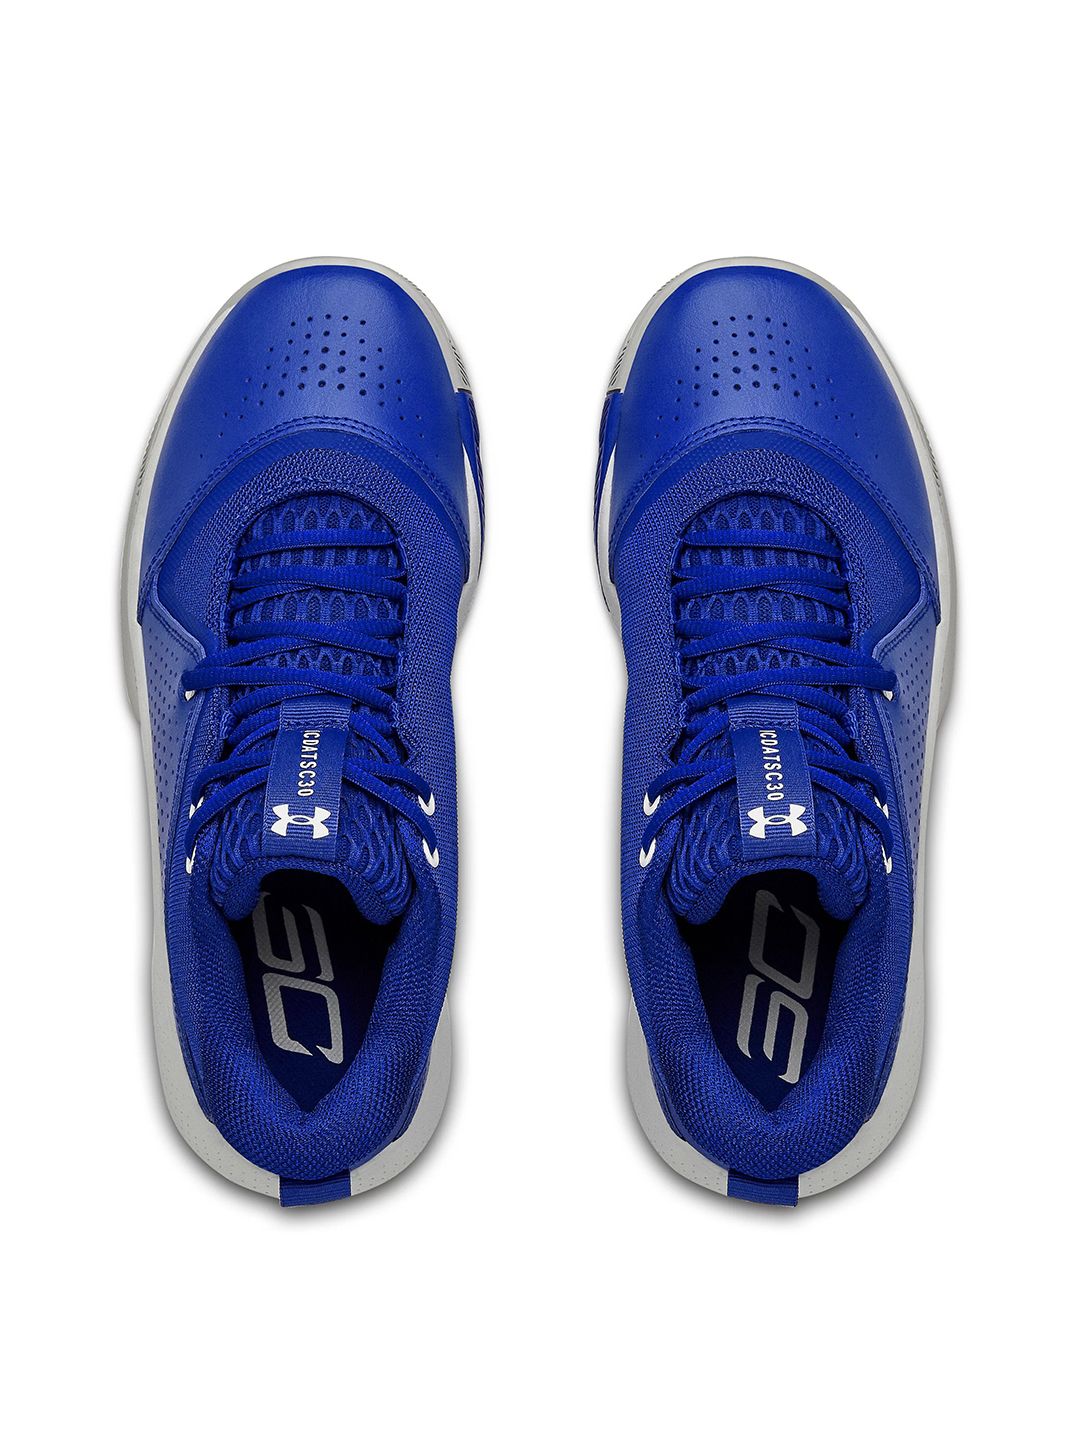 UNDER ARMOUR Unisex Blue 3ZER0 IV Basketball Shoes Price in India